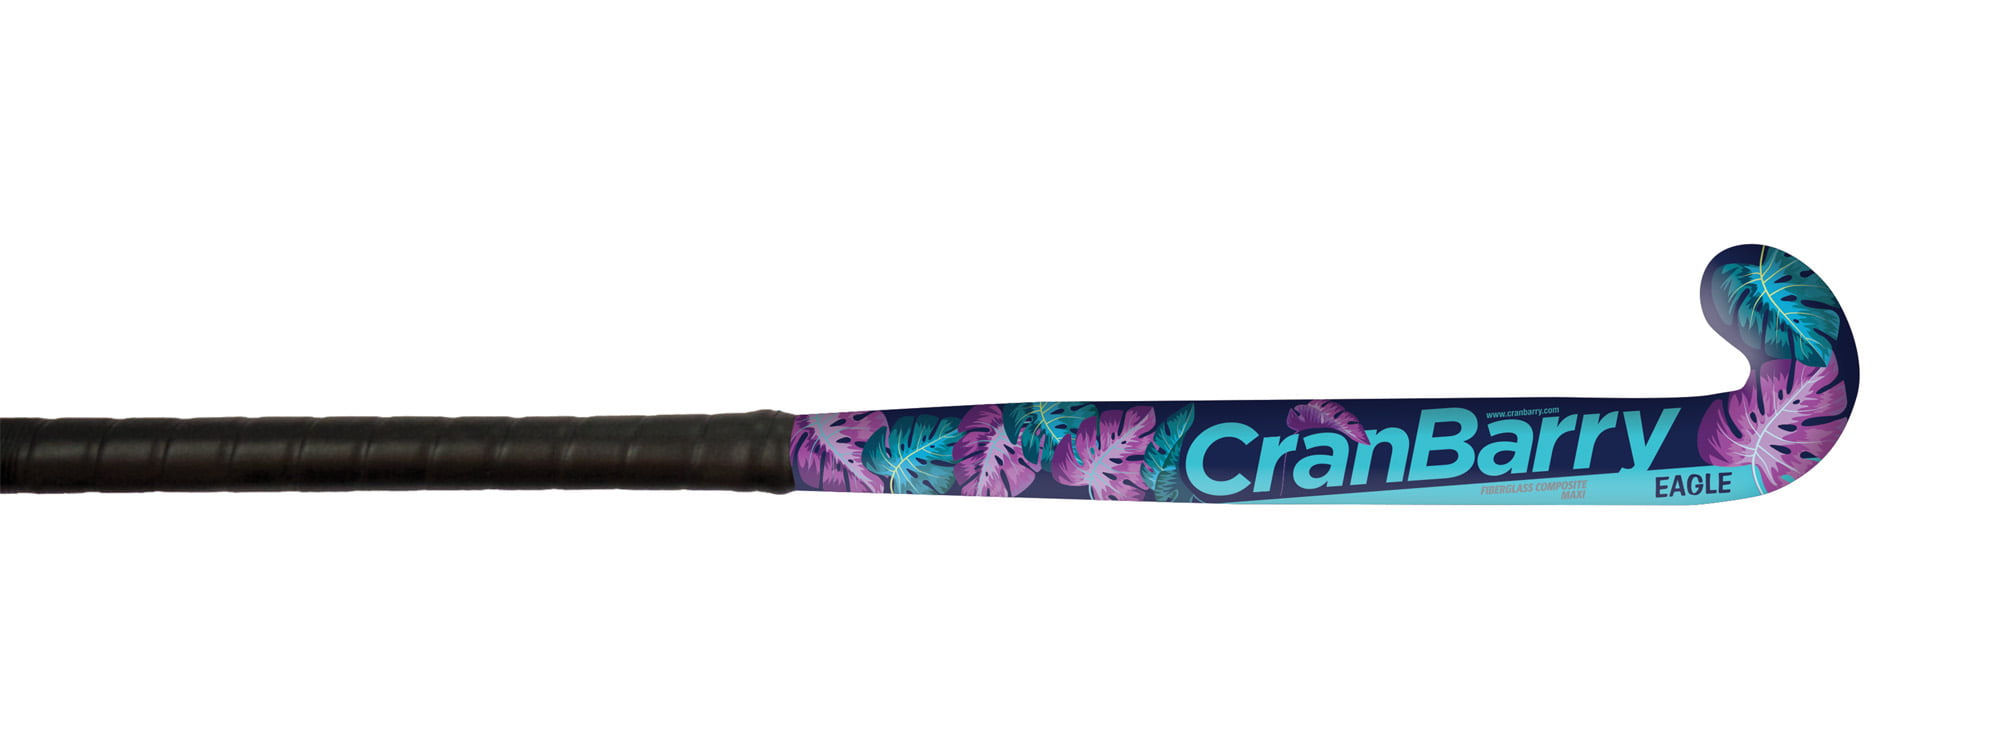 Details about   CranBarry Eagle Field Hockey Stick 